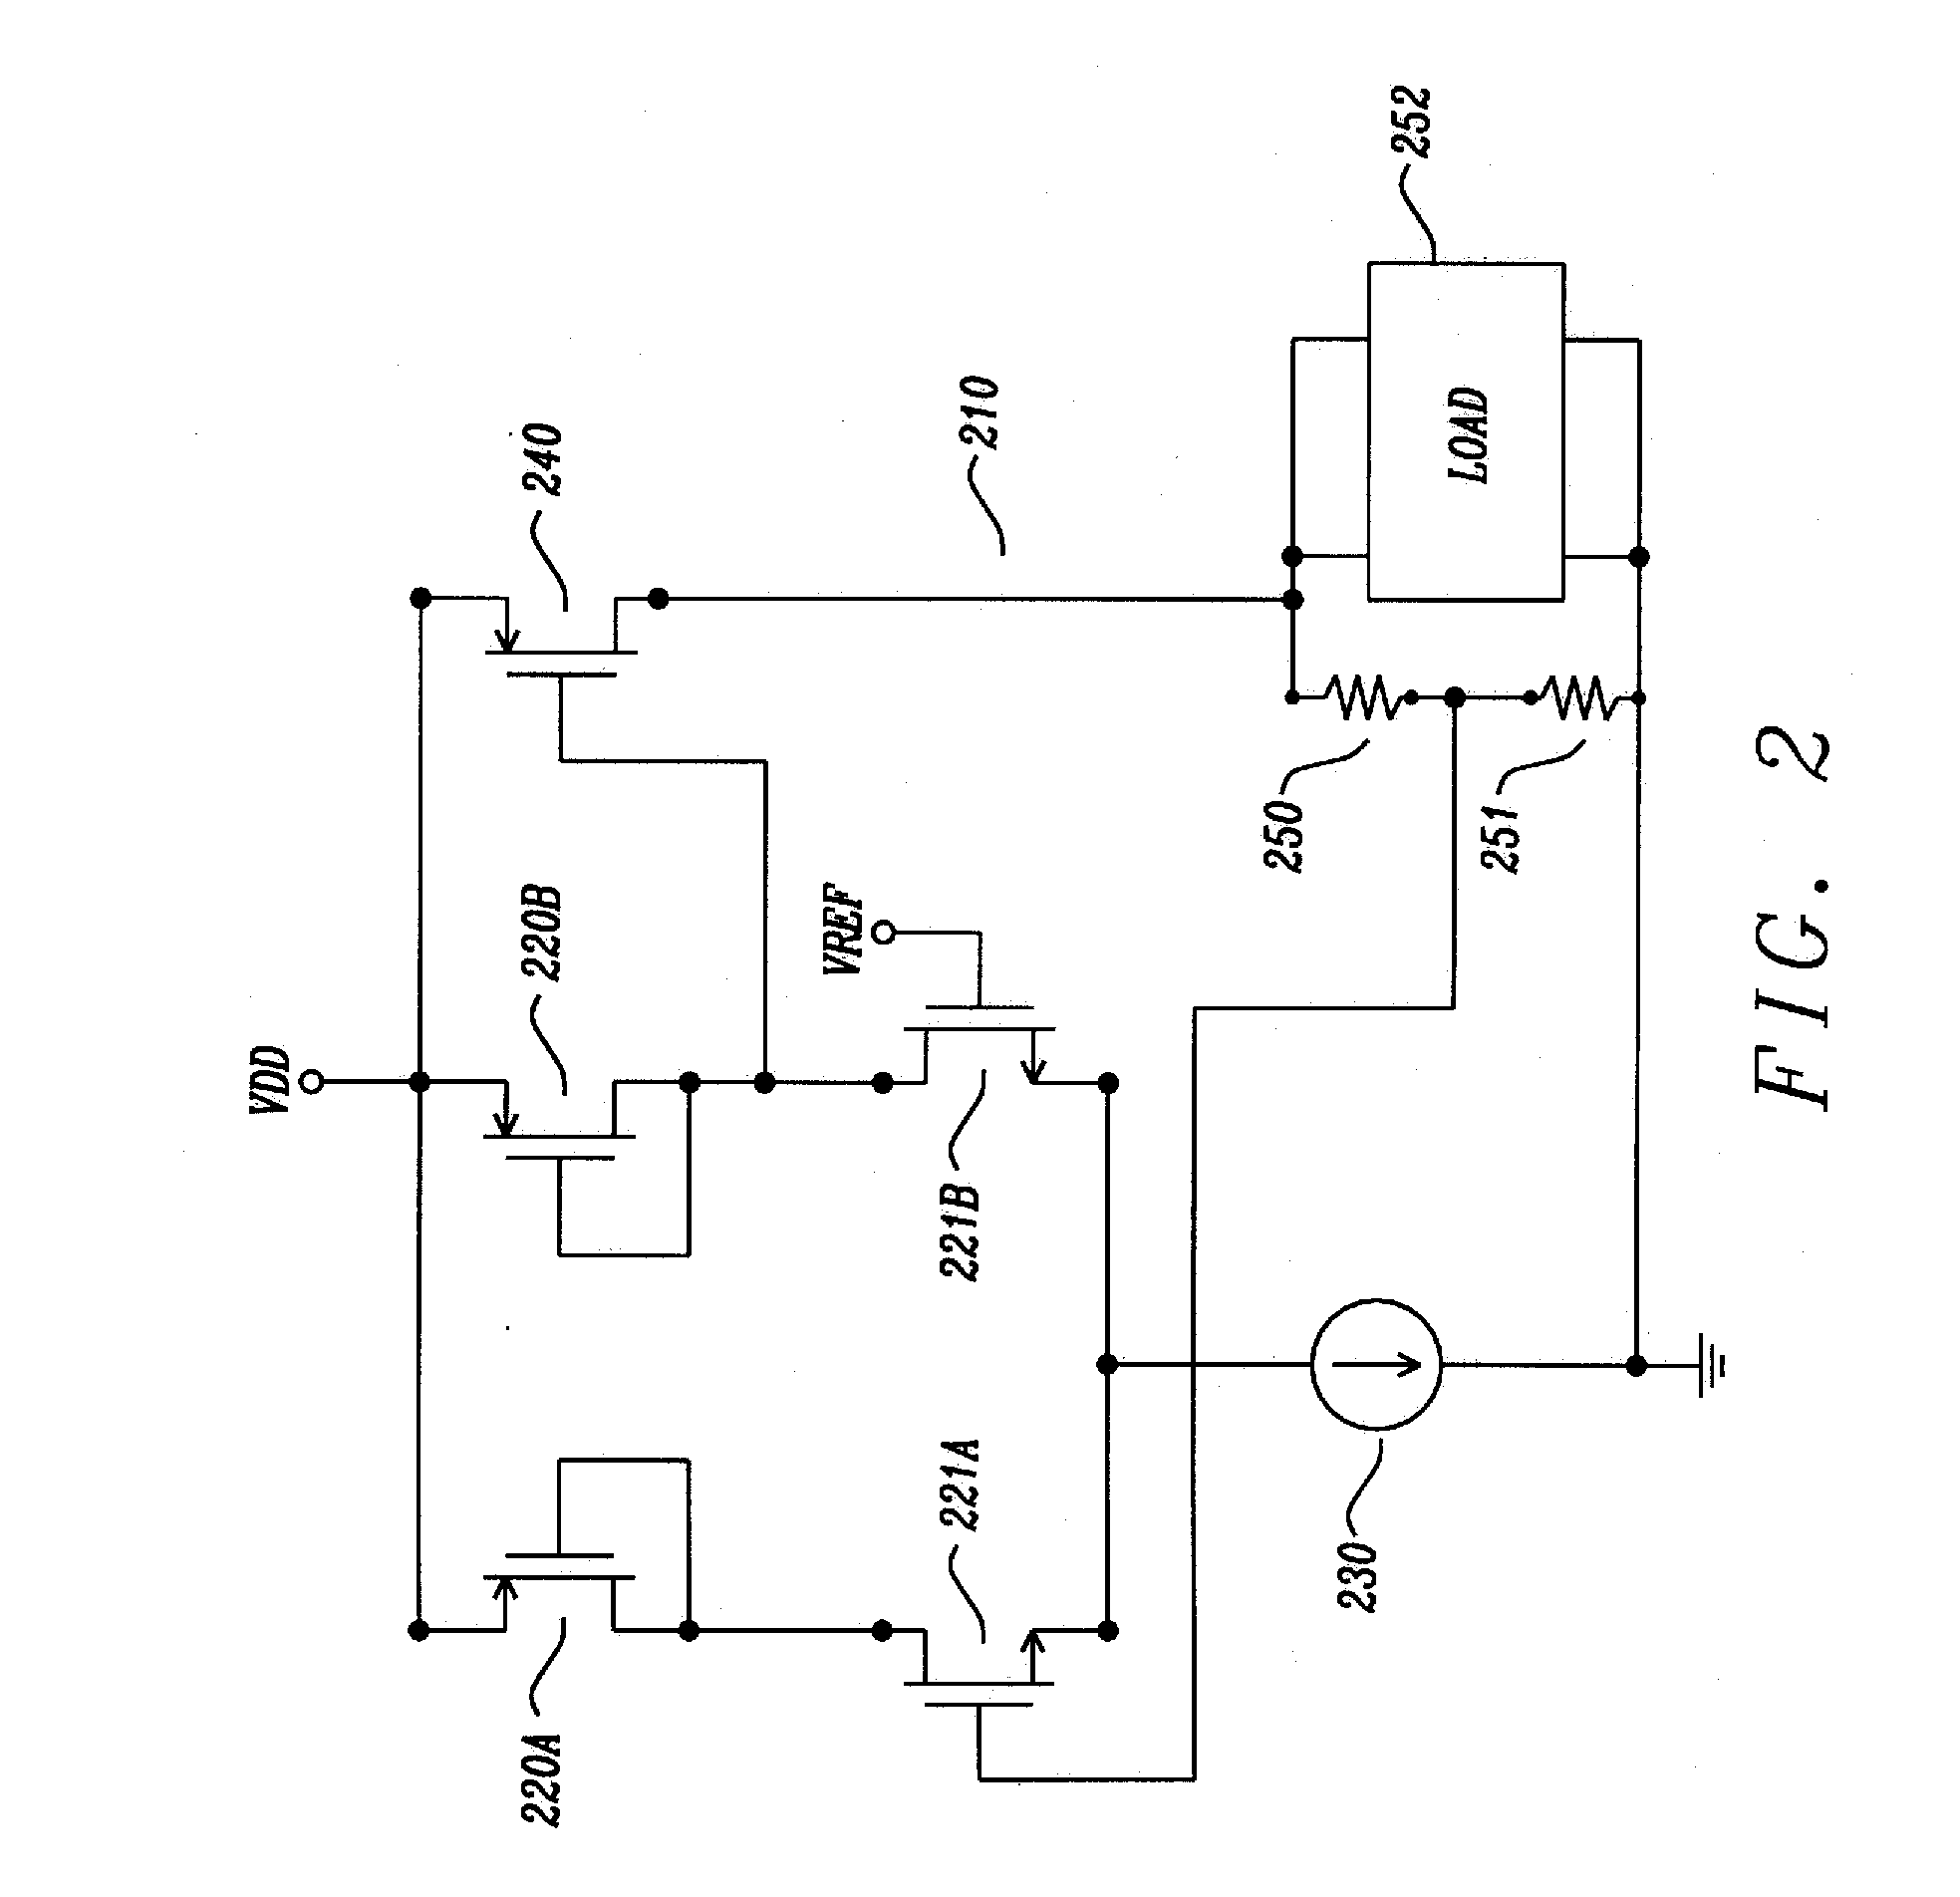 Apparatus and Method for a Voltage Regulator with Improved Output Voltage Regulated Loop Biasing